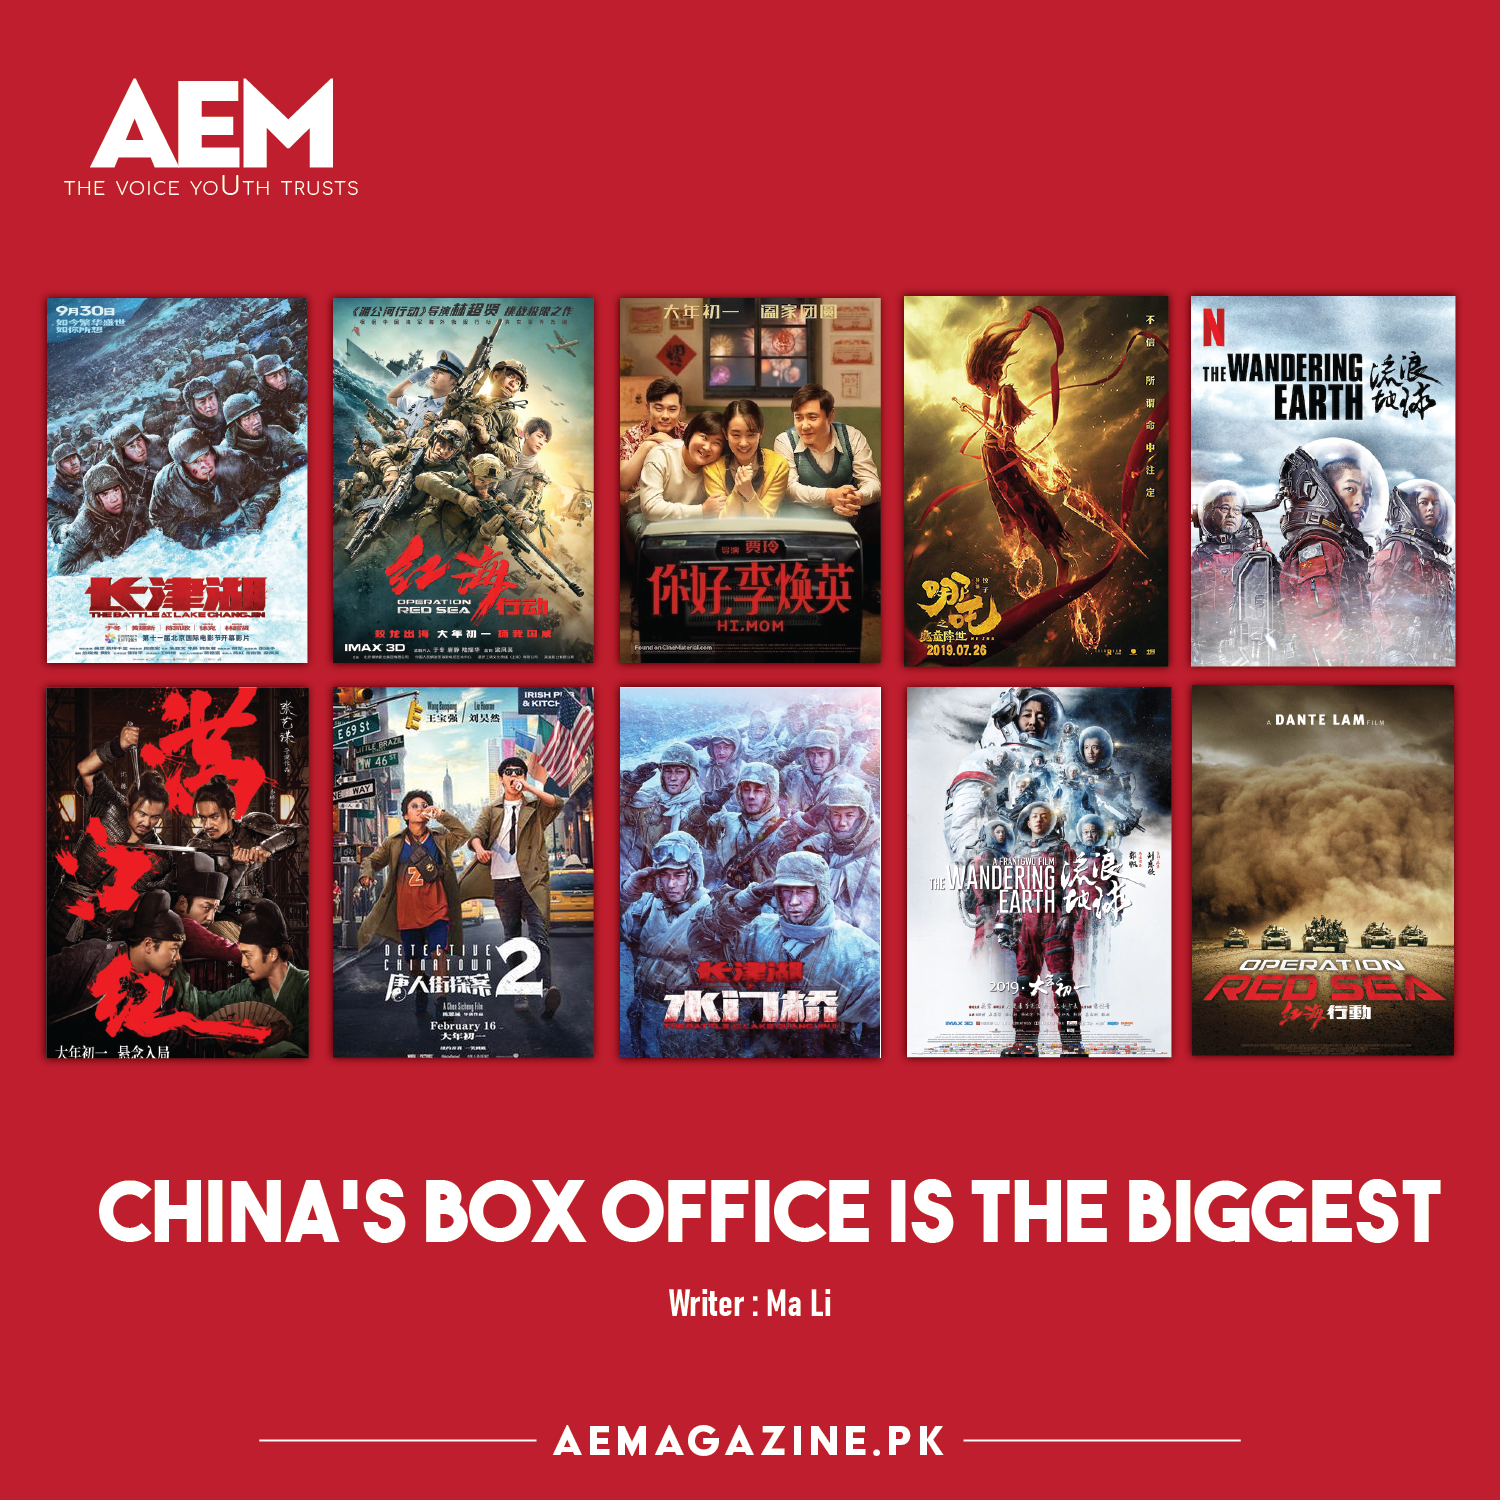 China’s Box Office is the Biggest